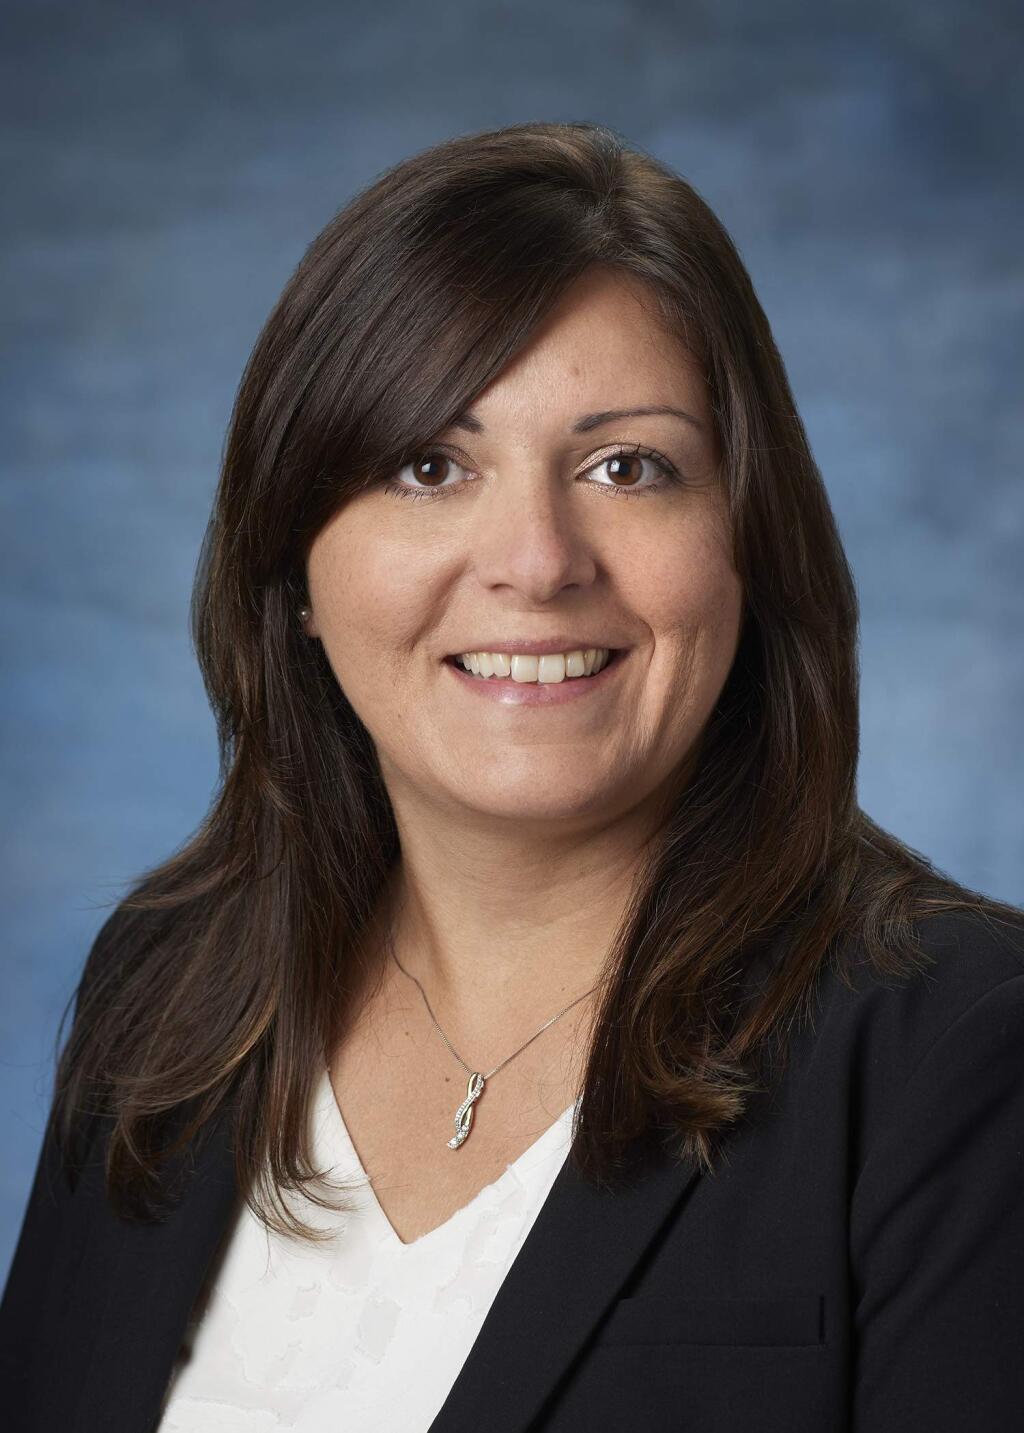 Stacy McKee, 39, assistant controller for Exchange Bank in Santa Rosa, is one of North Bay Business Journal's Forty Under 40 notable young professionals for 2019. (PROVIDED PHOTO)